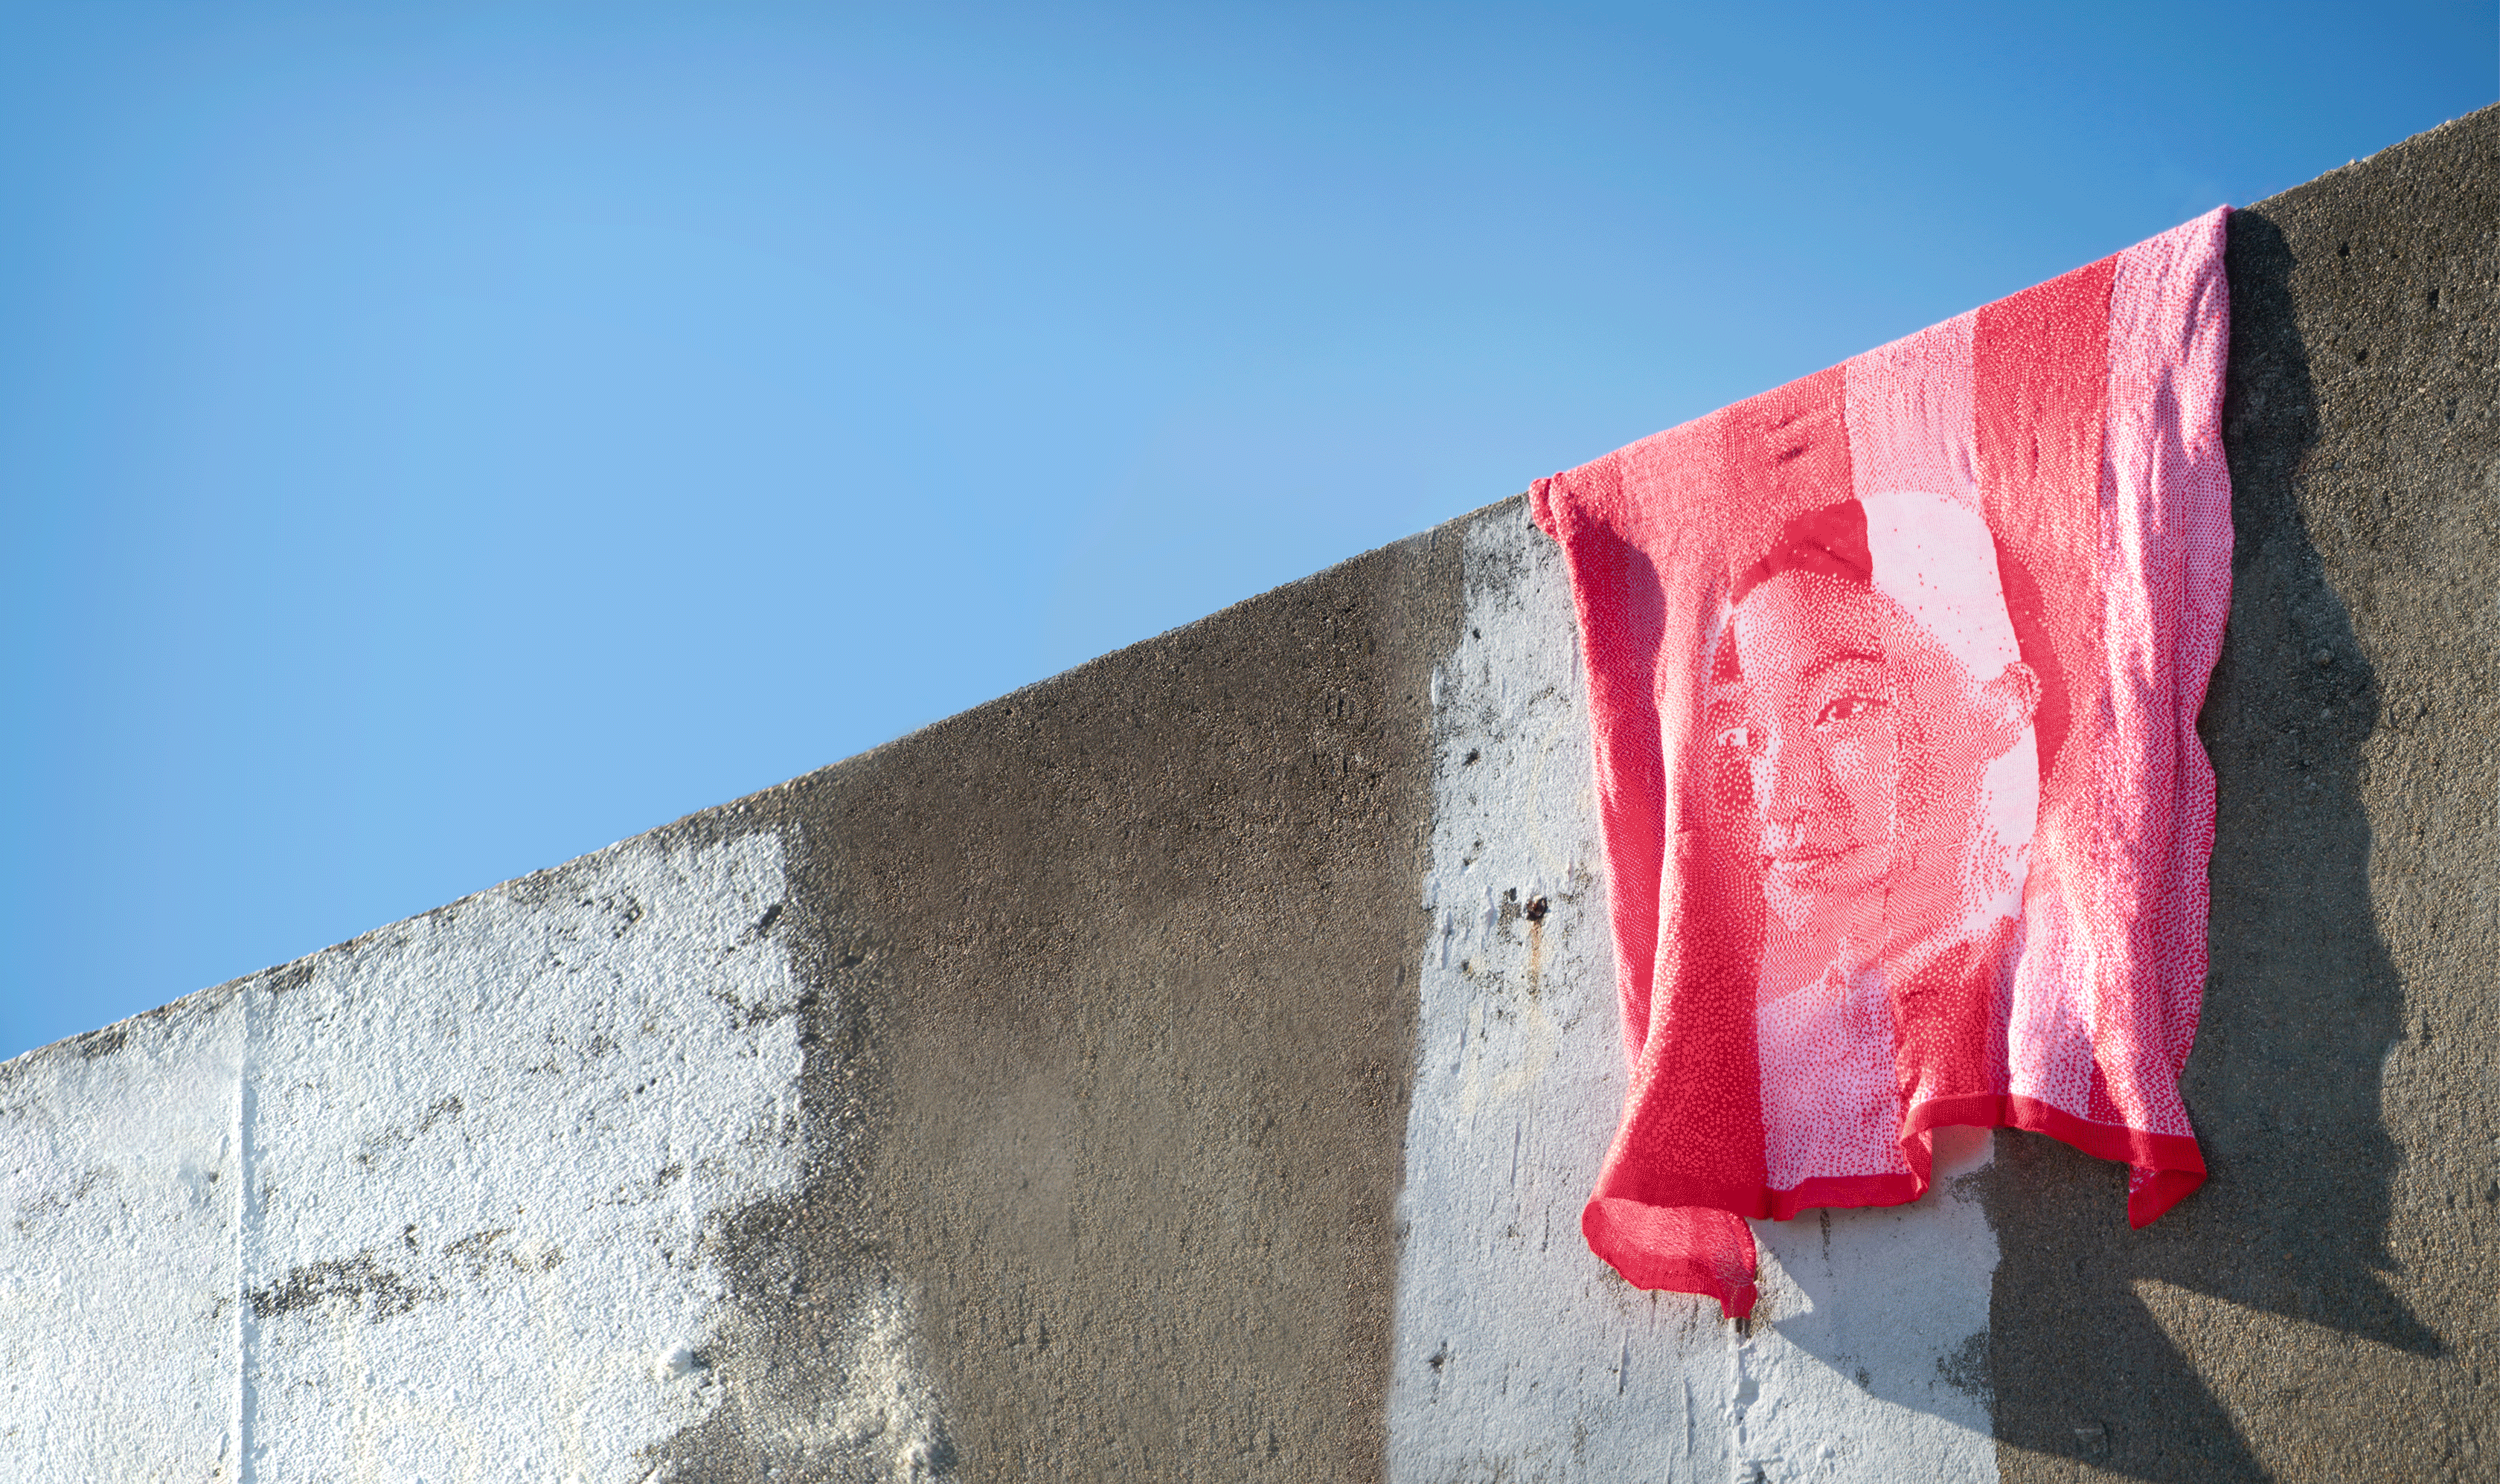 A knitted blanket in red and pink blowing in the wind. The blanket shows face of the artist.